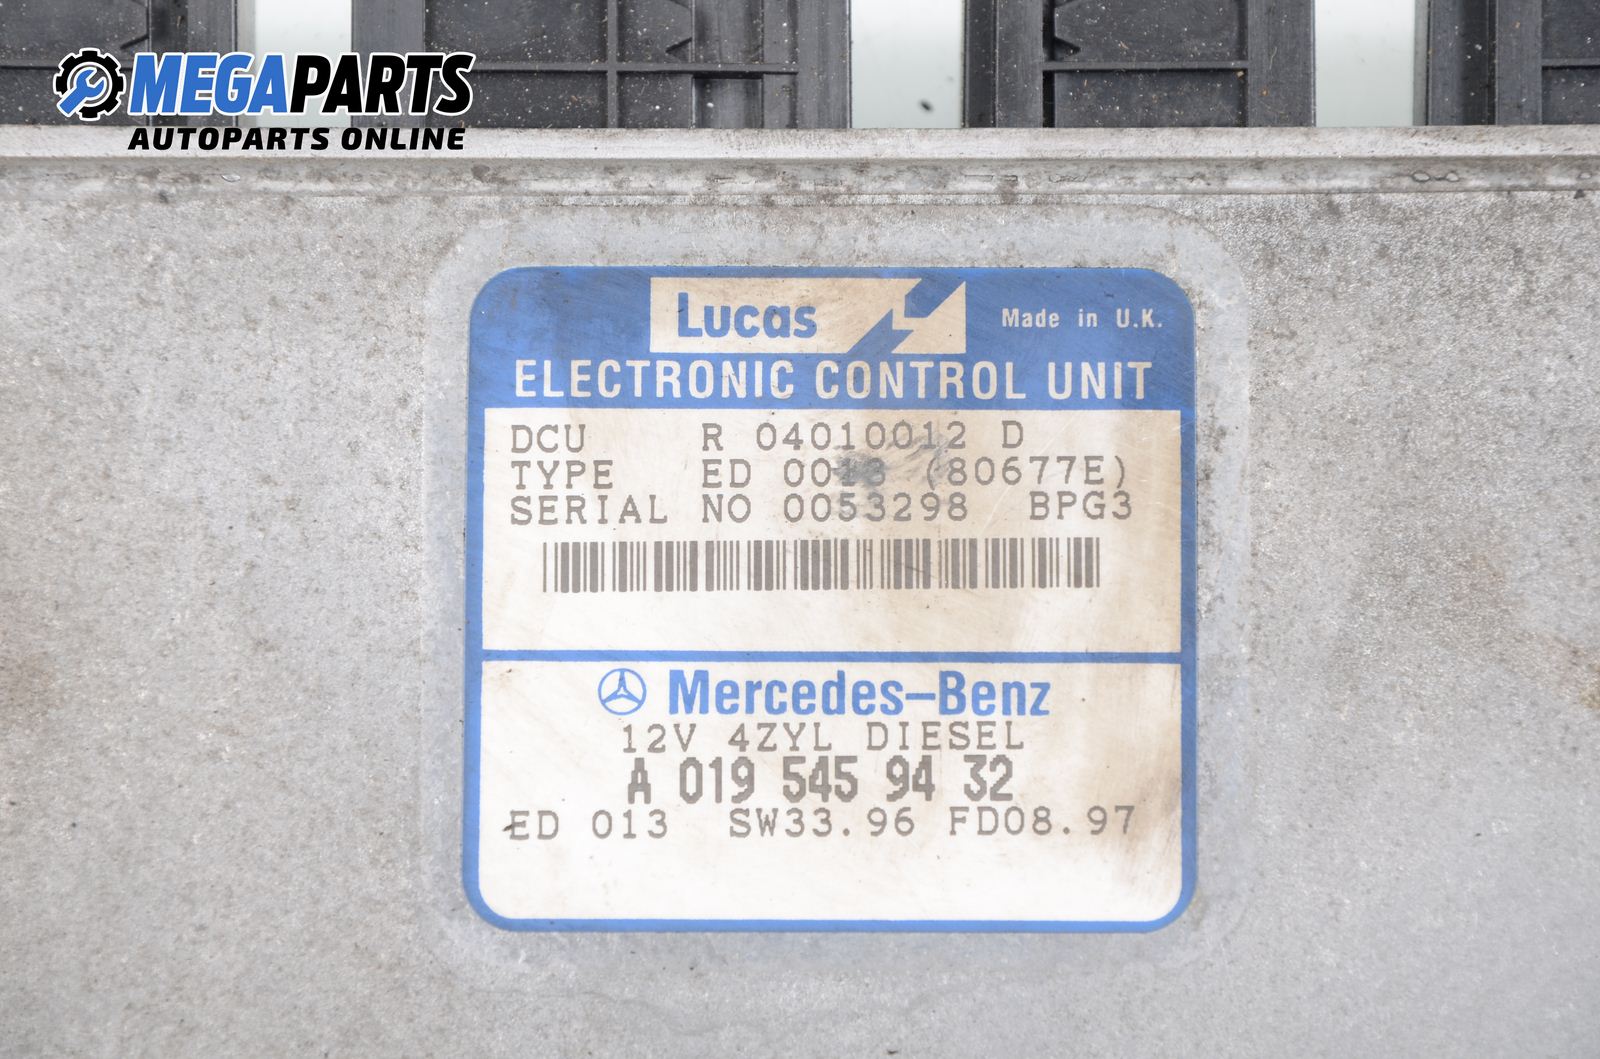 Ecu Incl. Ignition Key And Immobilizer For Mercedes-Benz C W202 2.2 D, 95 Hp, Station Wagon Automatic, 1997 № A 019 545 94 32 Price: € 96.39